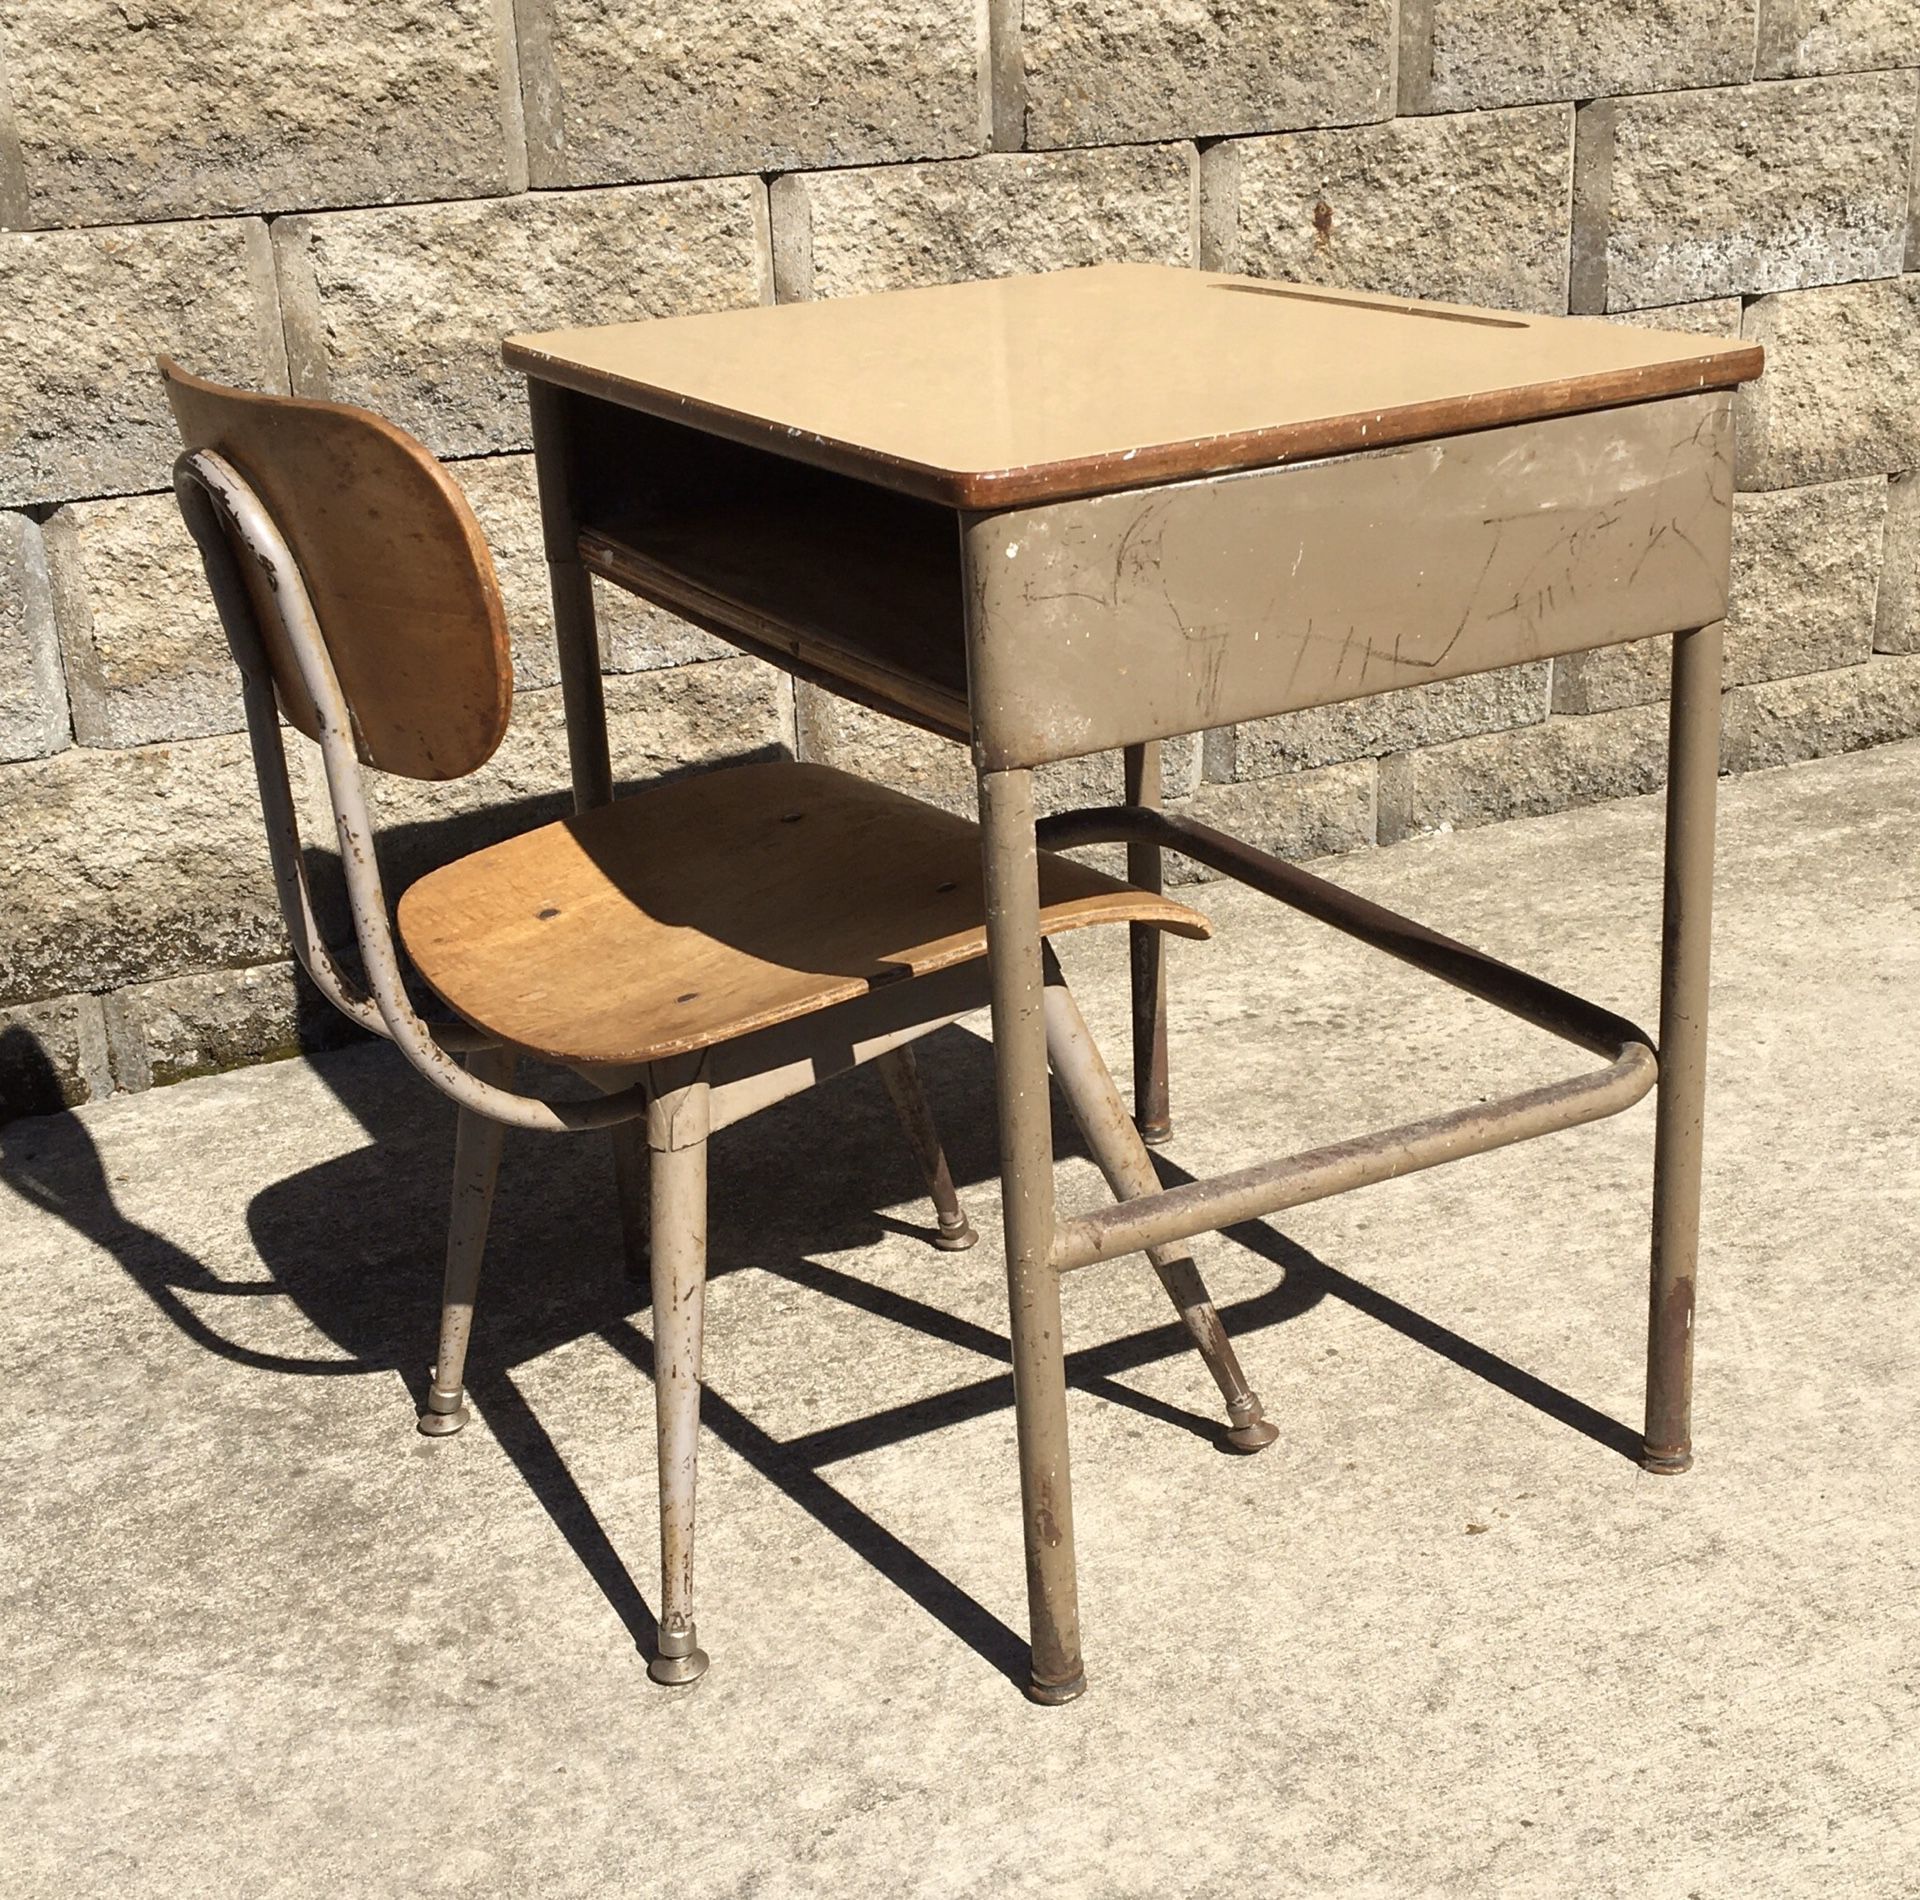 OLD FASHIONED STUDENT DESK AND CHAIR